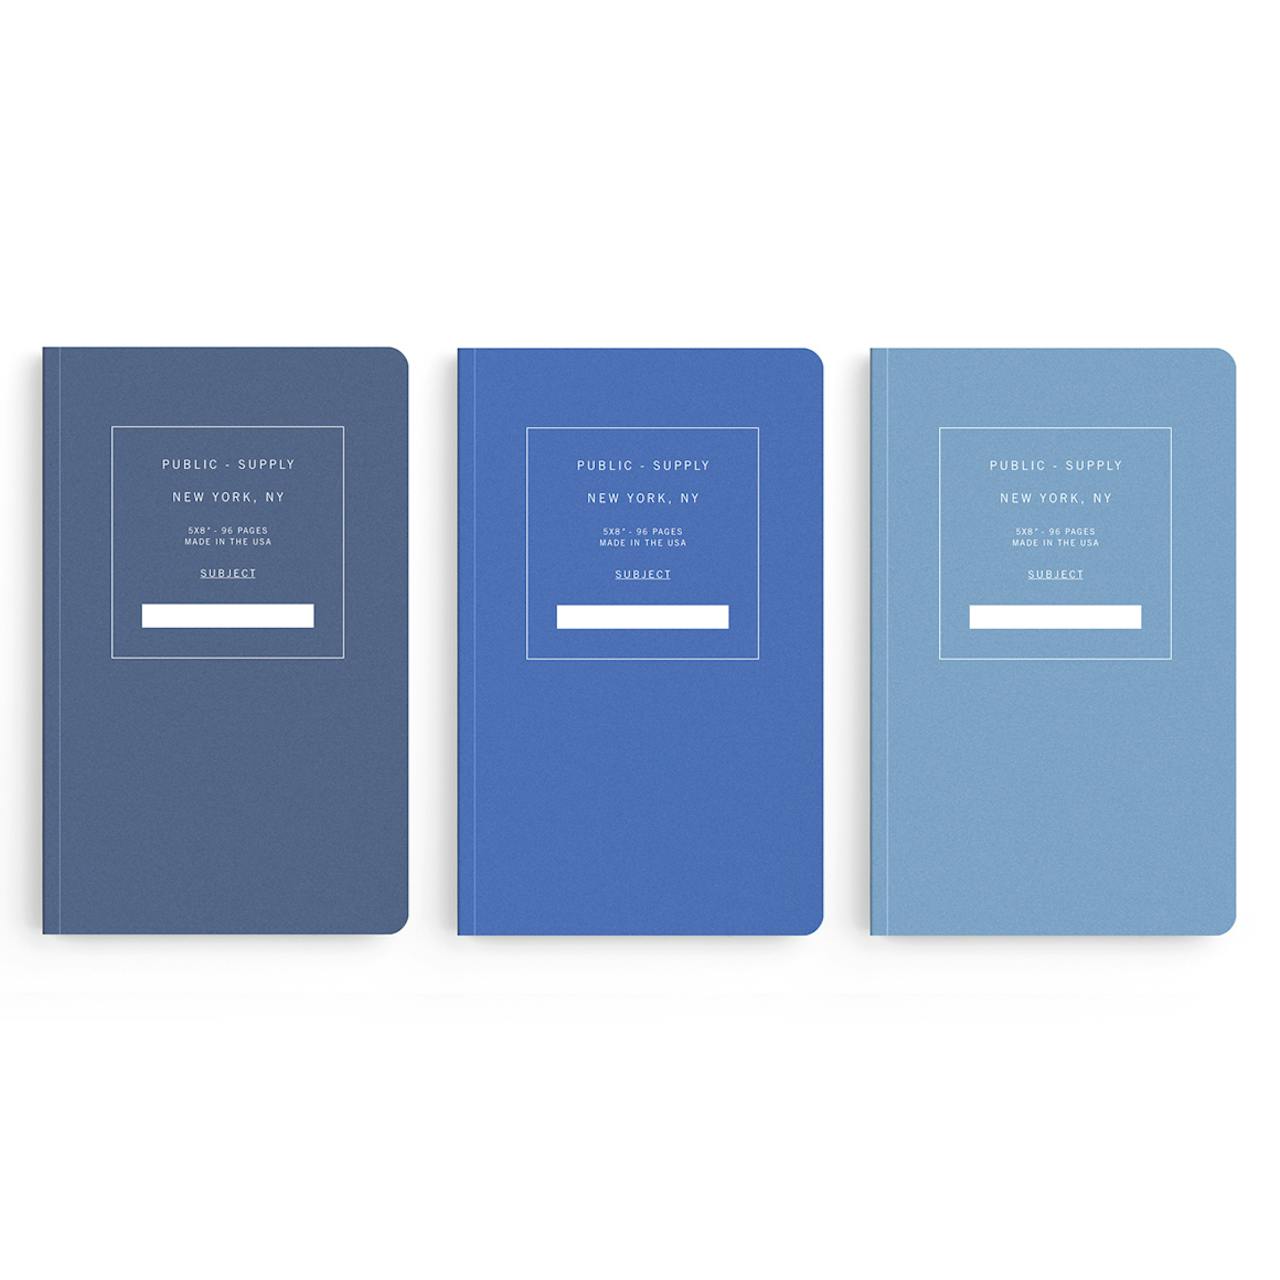 Public-Supply 3 Pack Blue Notebooks 01, 02, 03